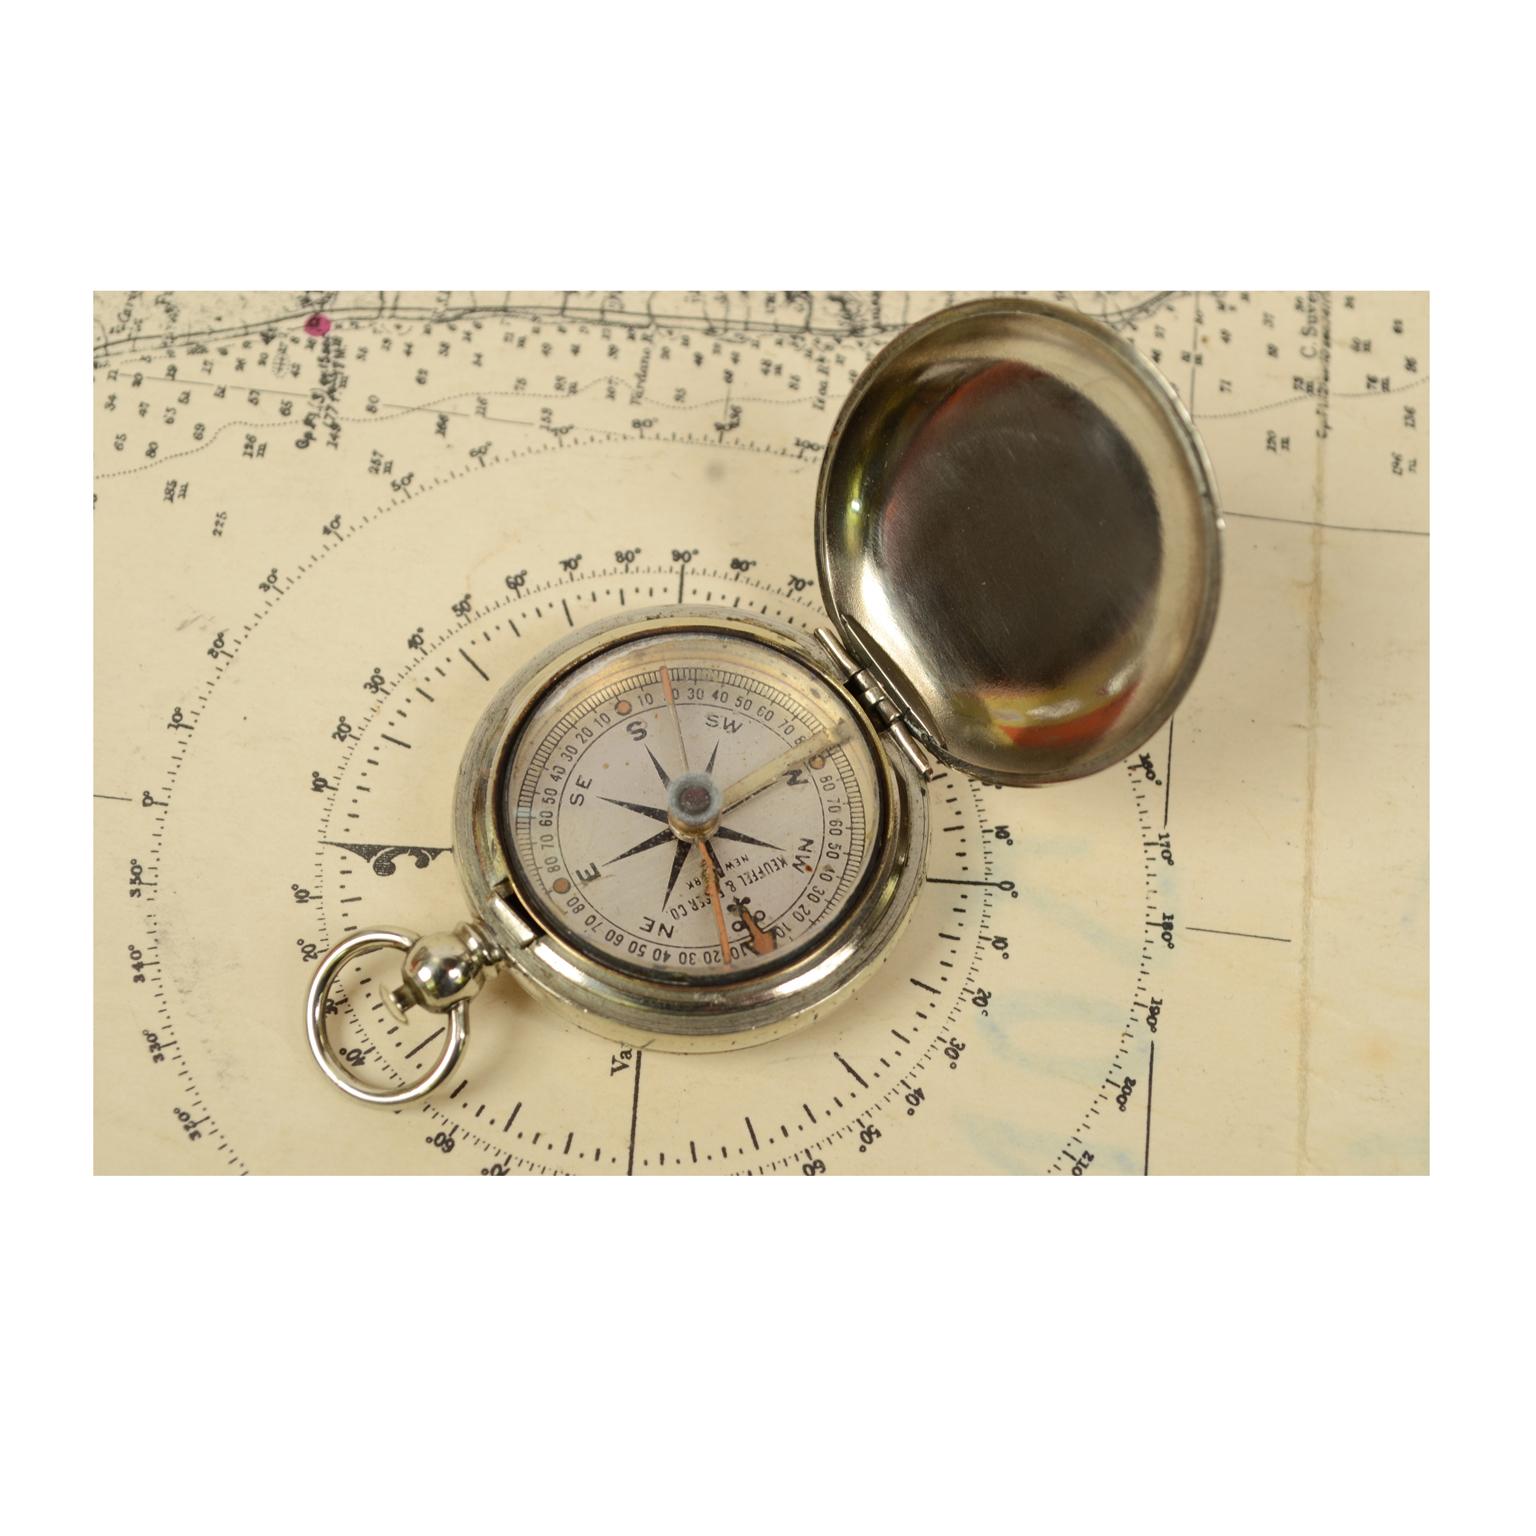 Pocket compass signed Keuffel & Esser Co New York, used by US Army officers during the First World War of chrome-plated brass in the shape of a pocket watch. The compass is equipped with a lid with snap closure with release button inside the ring.